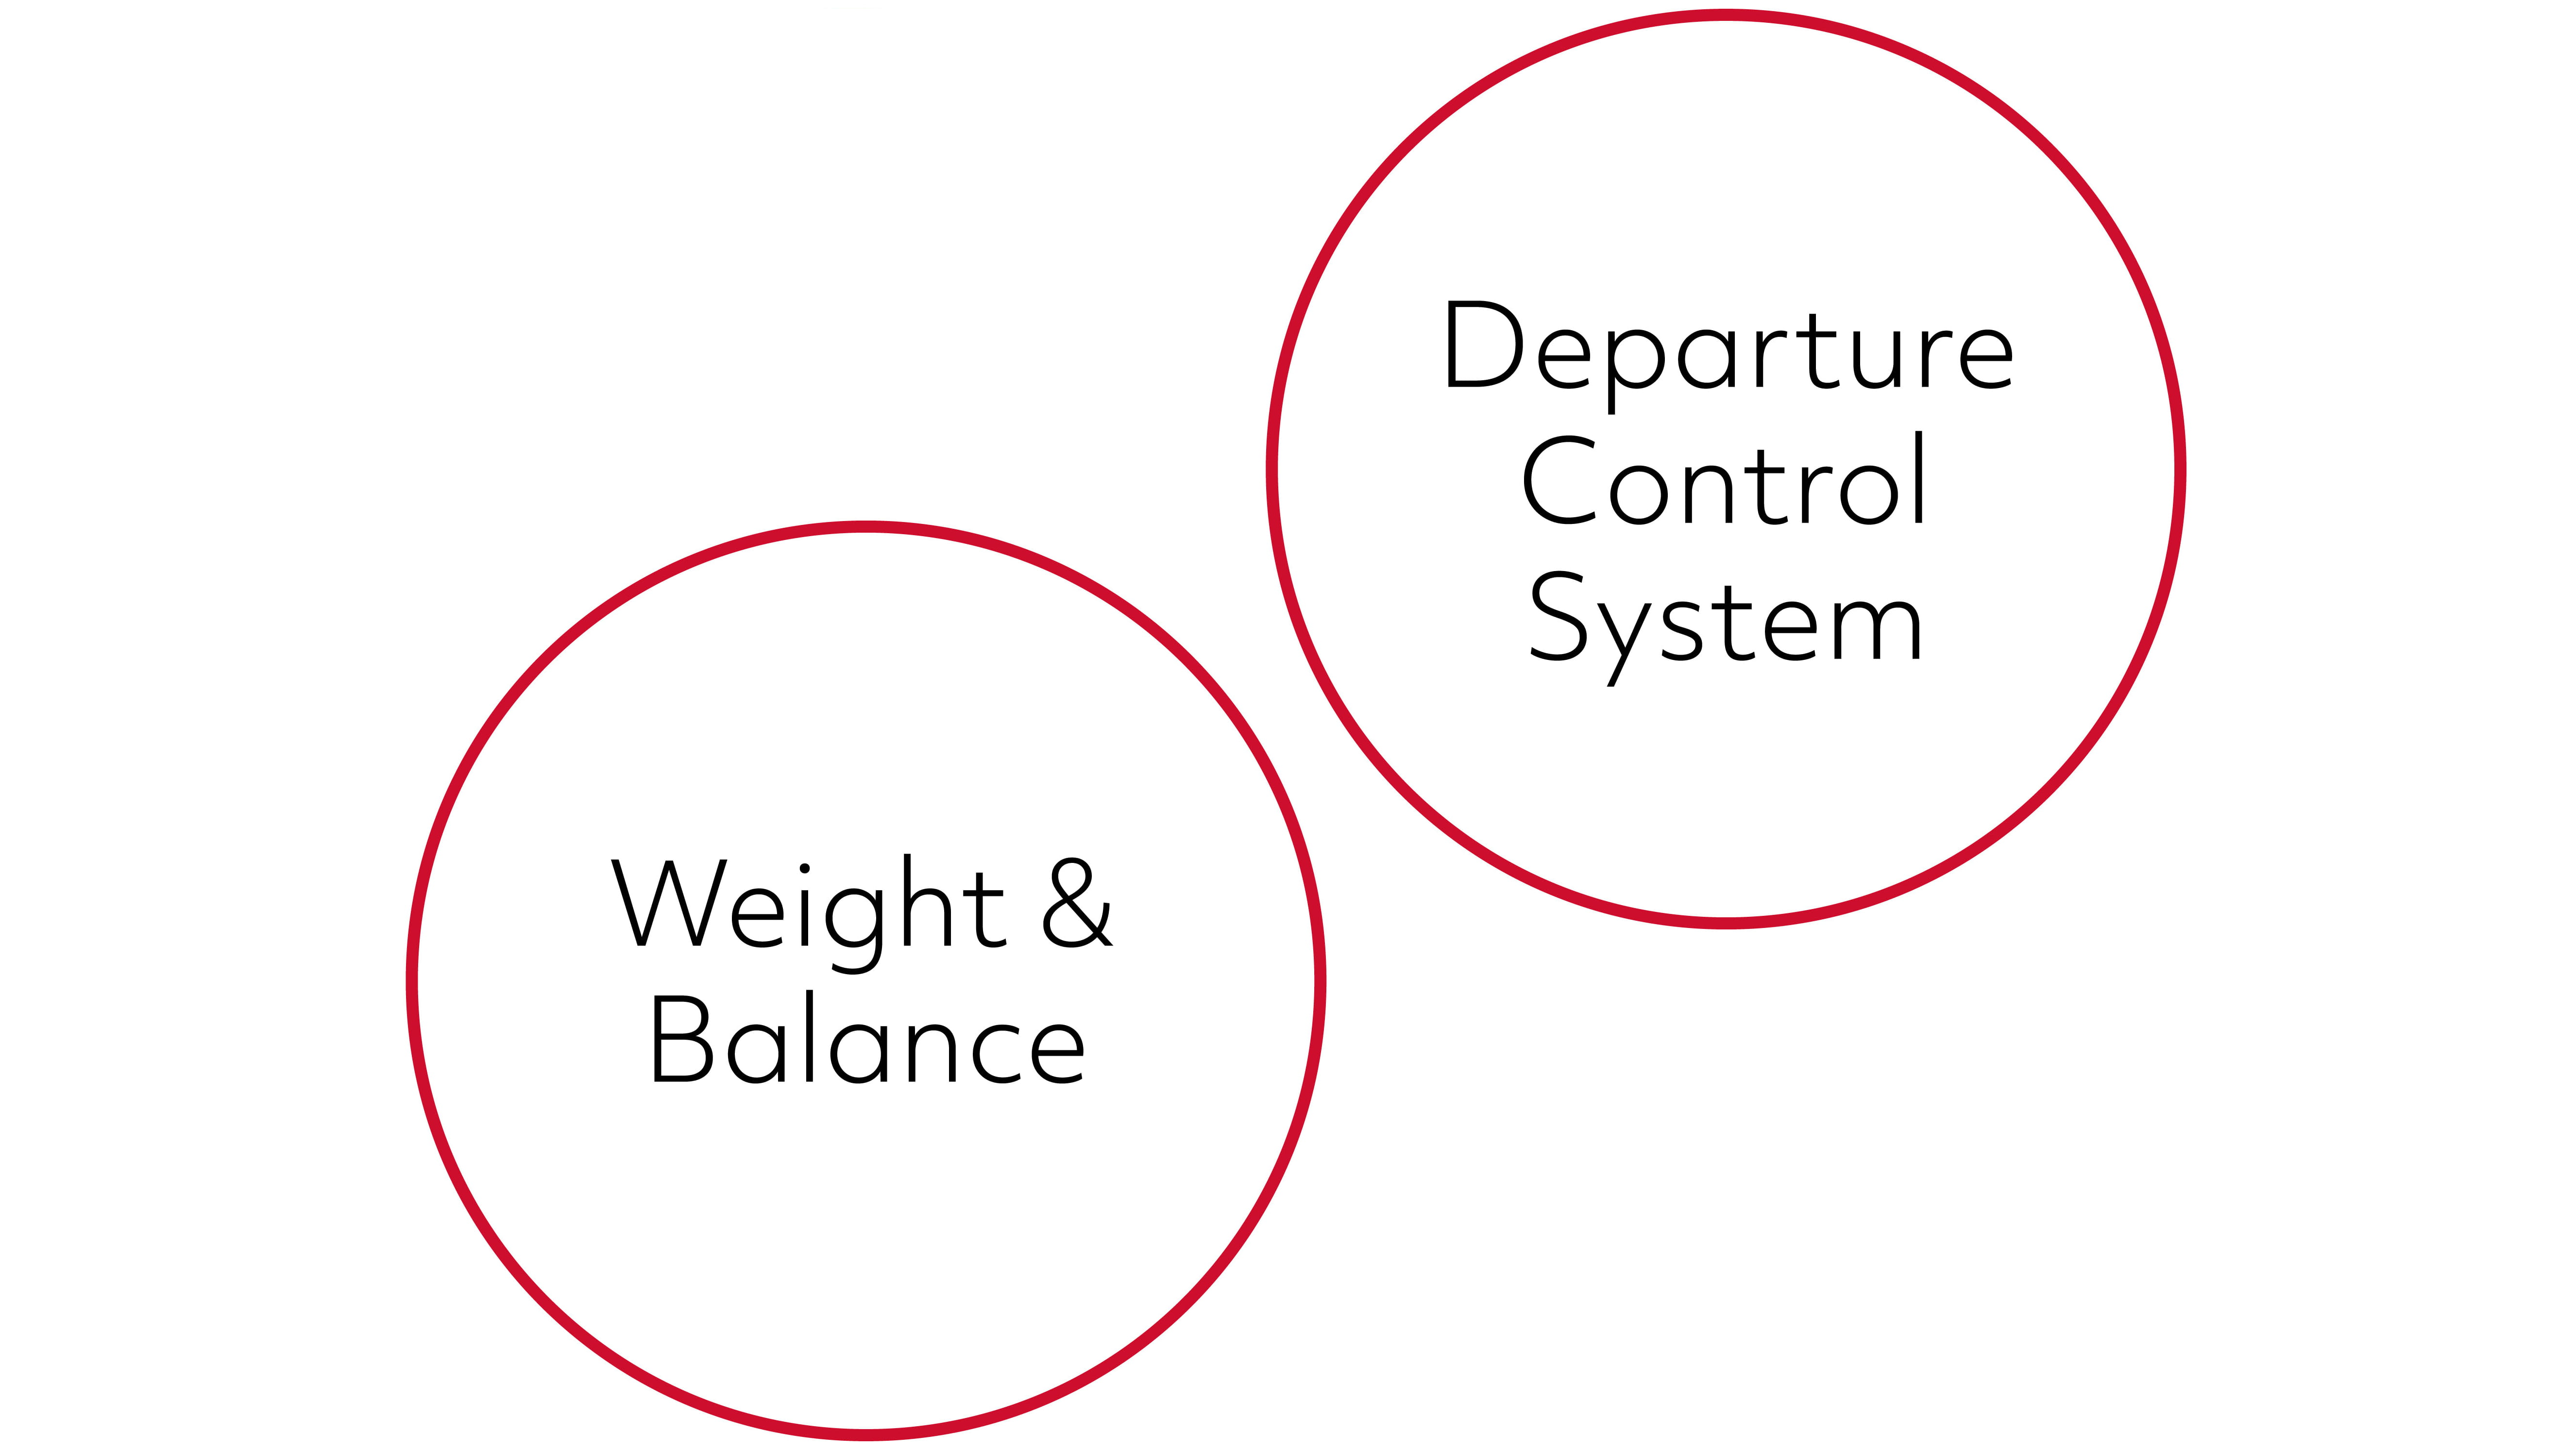 Weight & balance and Departure control system in red circles